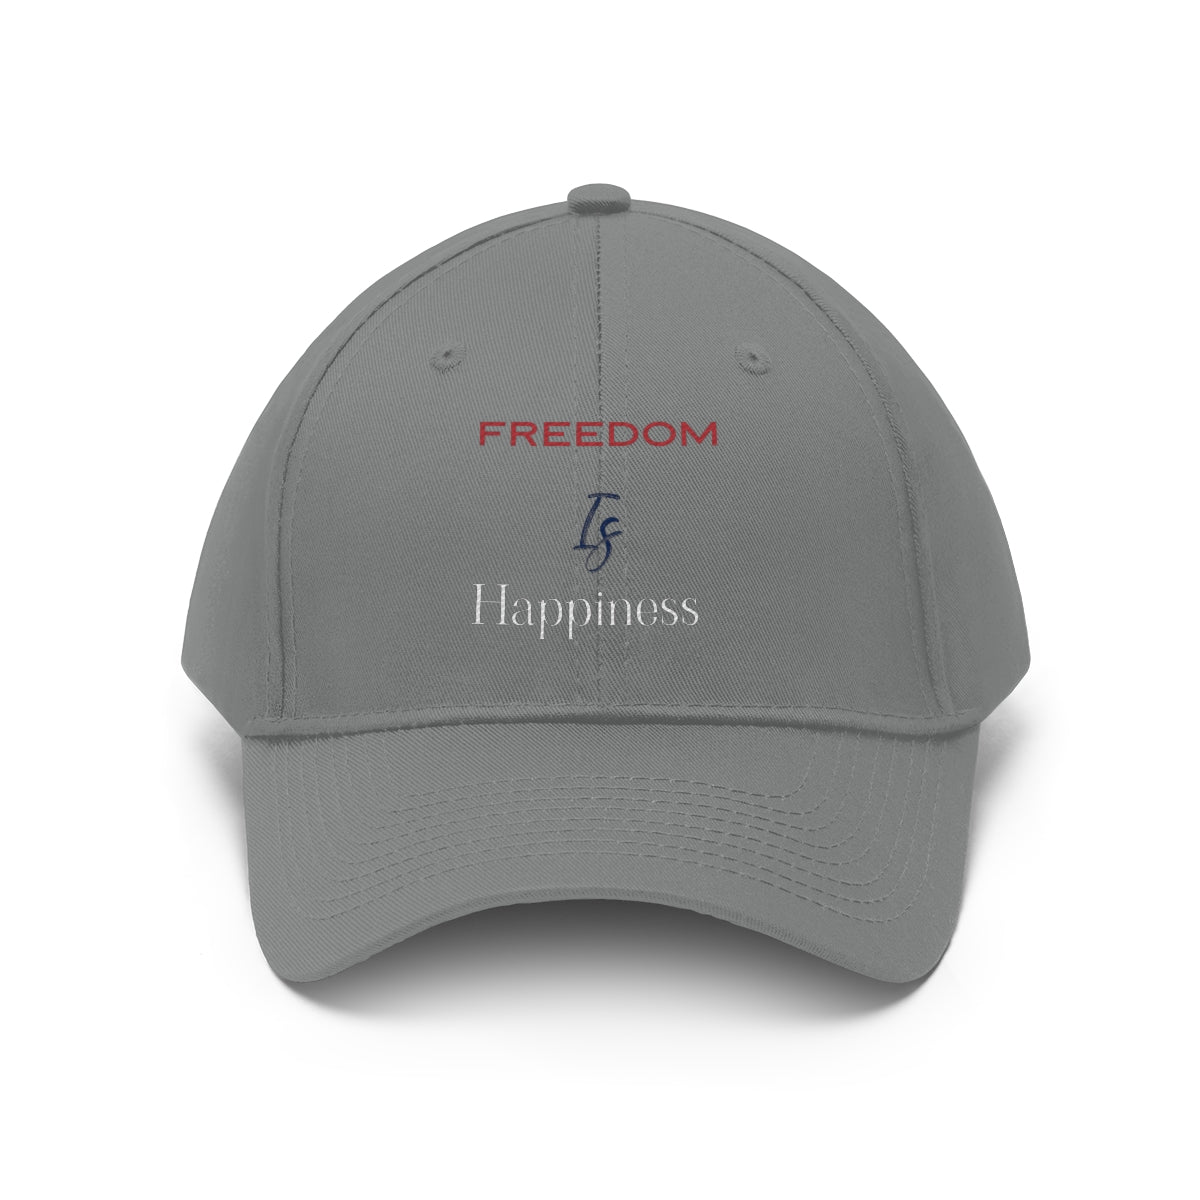 Freedom is happiness hat